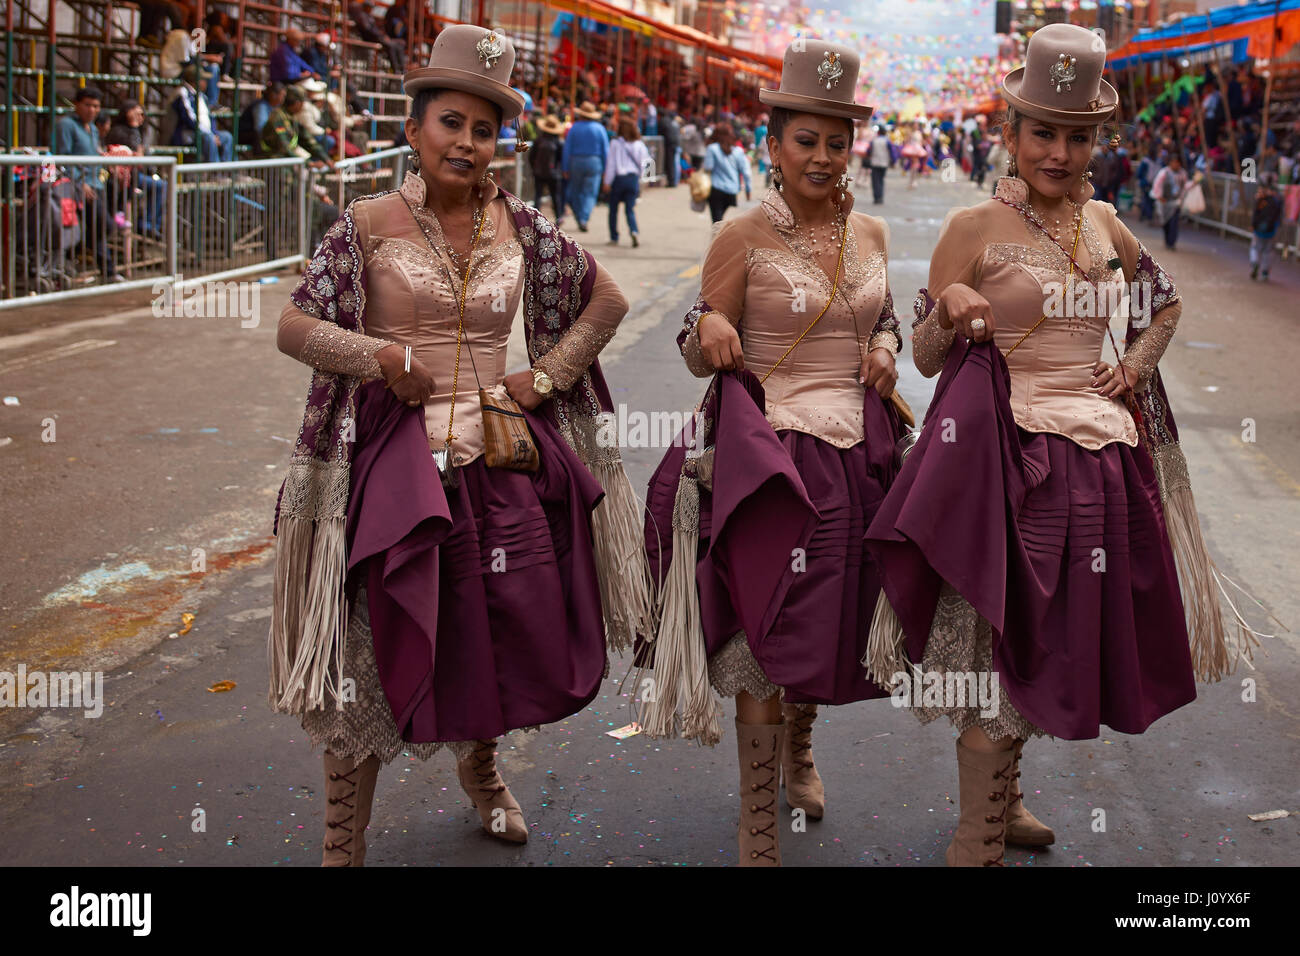 Morenada dance group in colourful outfits parading through the mining city of Oruro on the Altiplano of Bolivia during the annual Oruro Carnival. Stock Photo